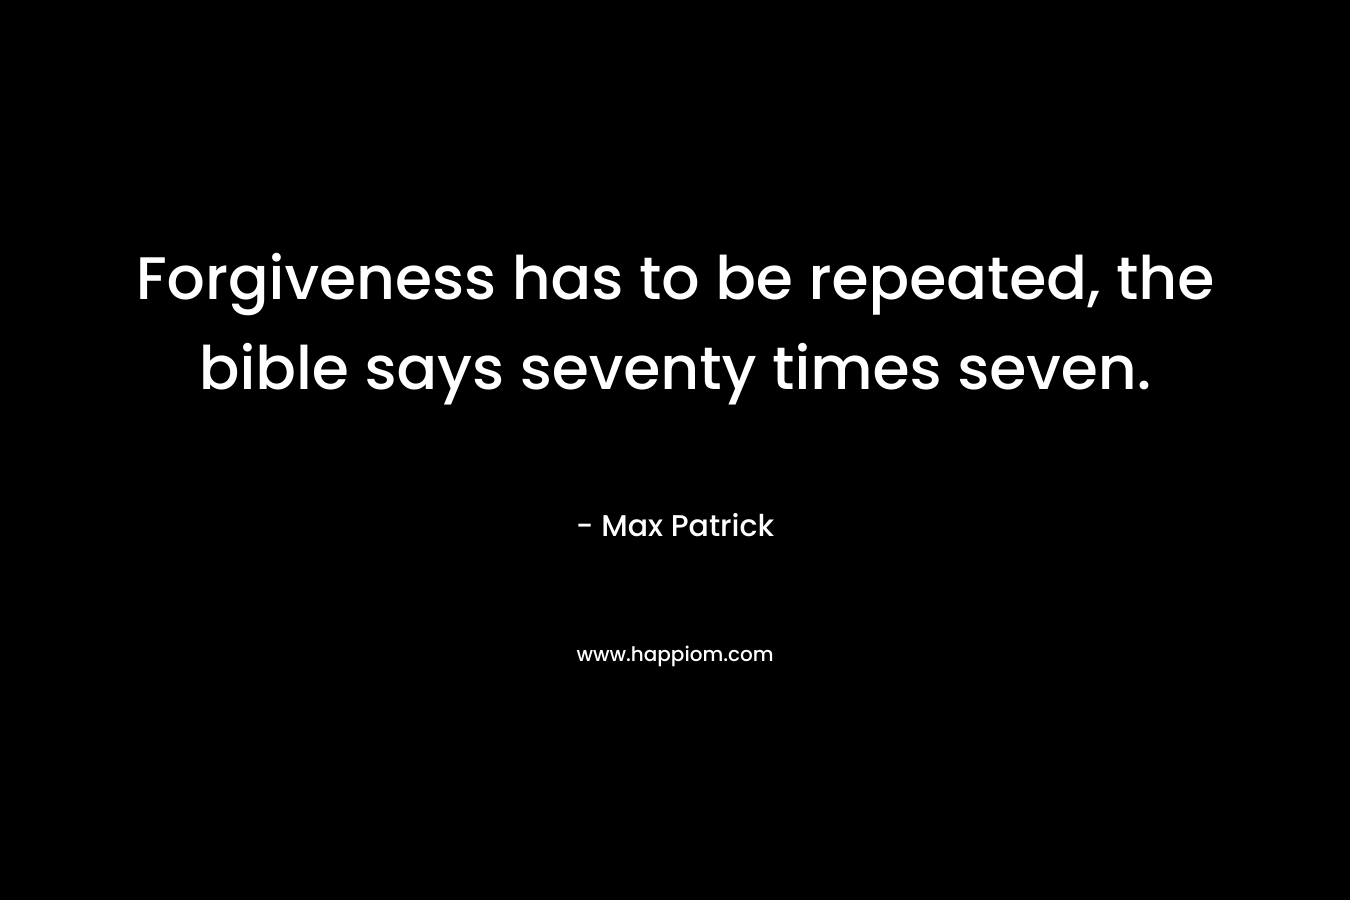 Forgiveness has to be repeated, the bible says seventy times seven. – Max Patrick